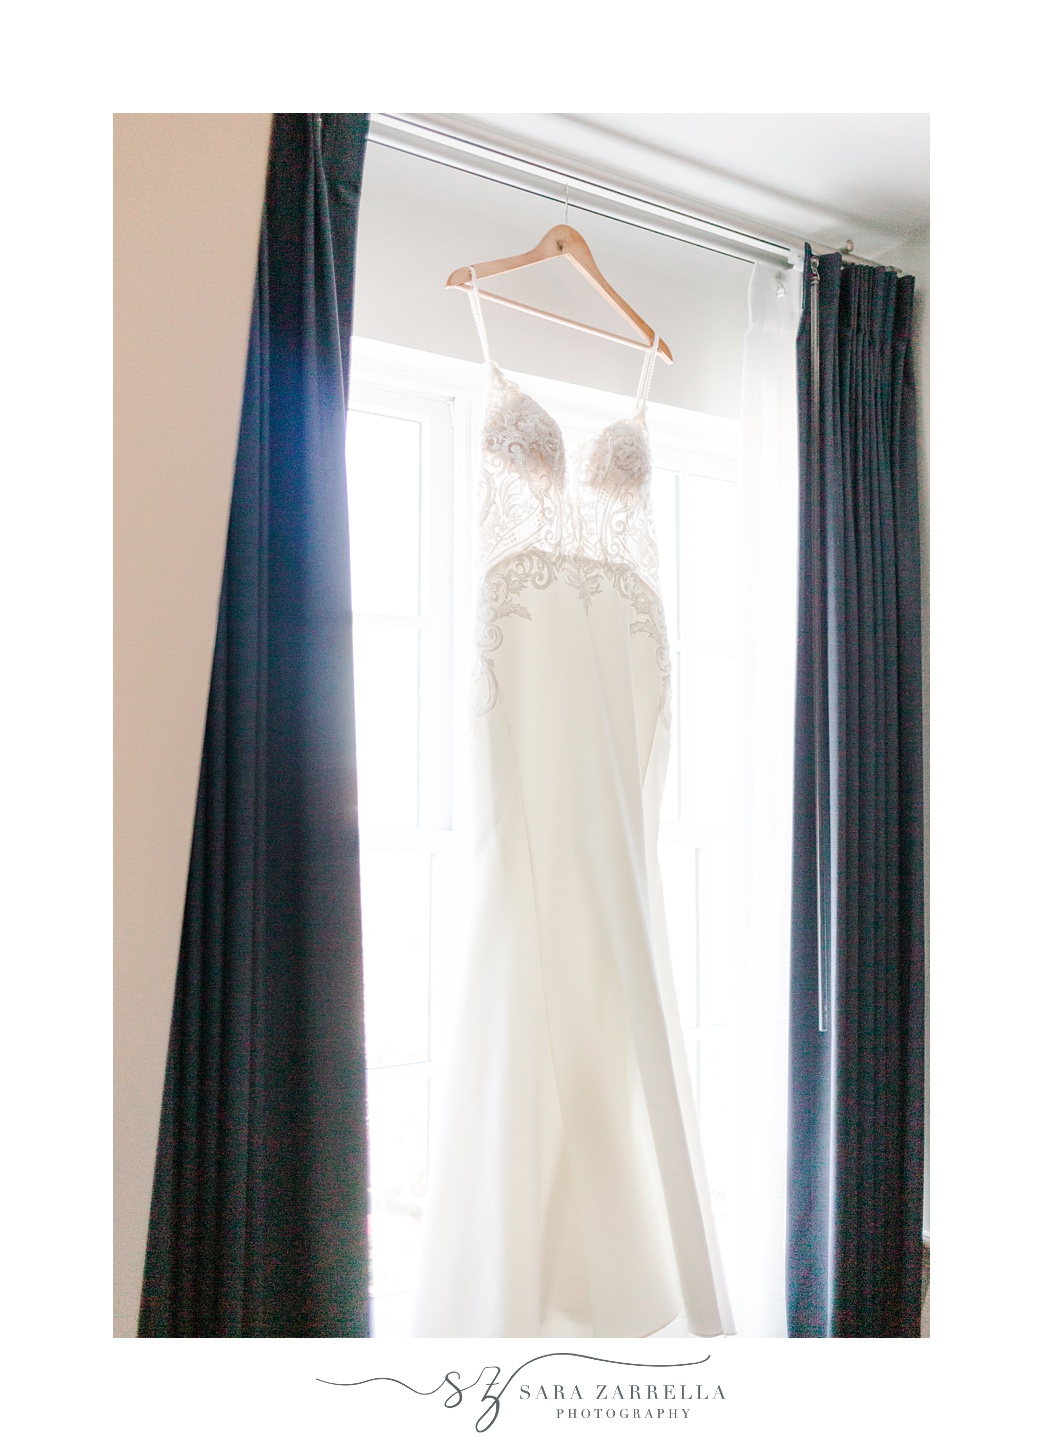 wedding gown hangs in window between navy curtains at Regatta Place